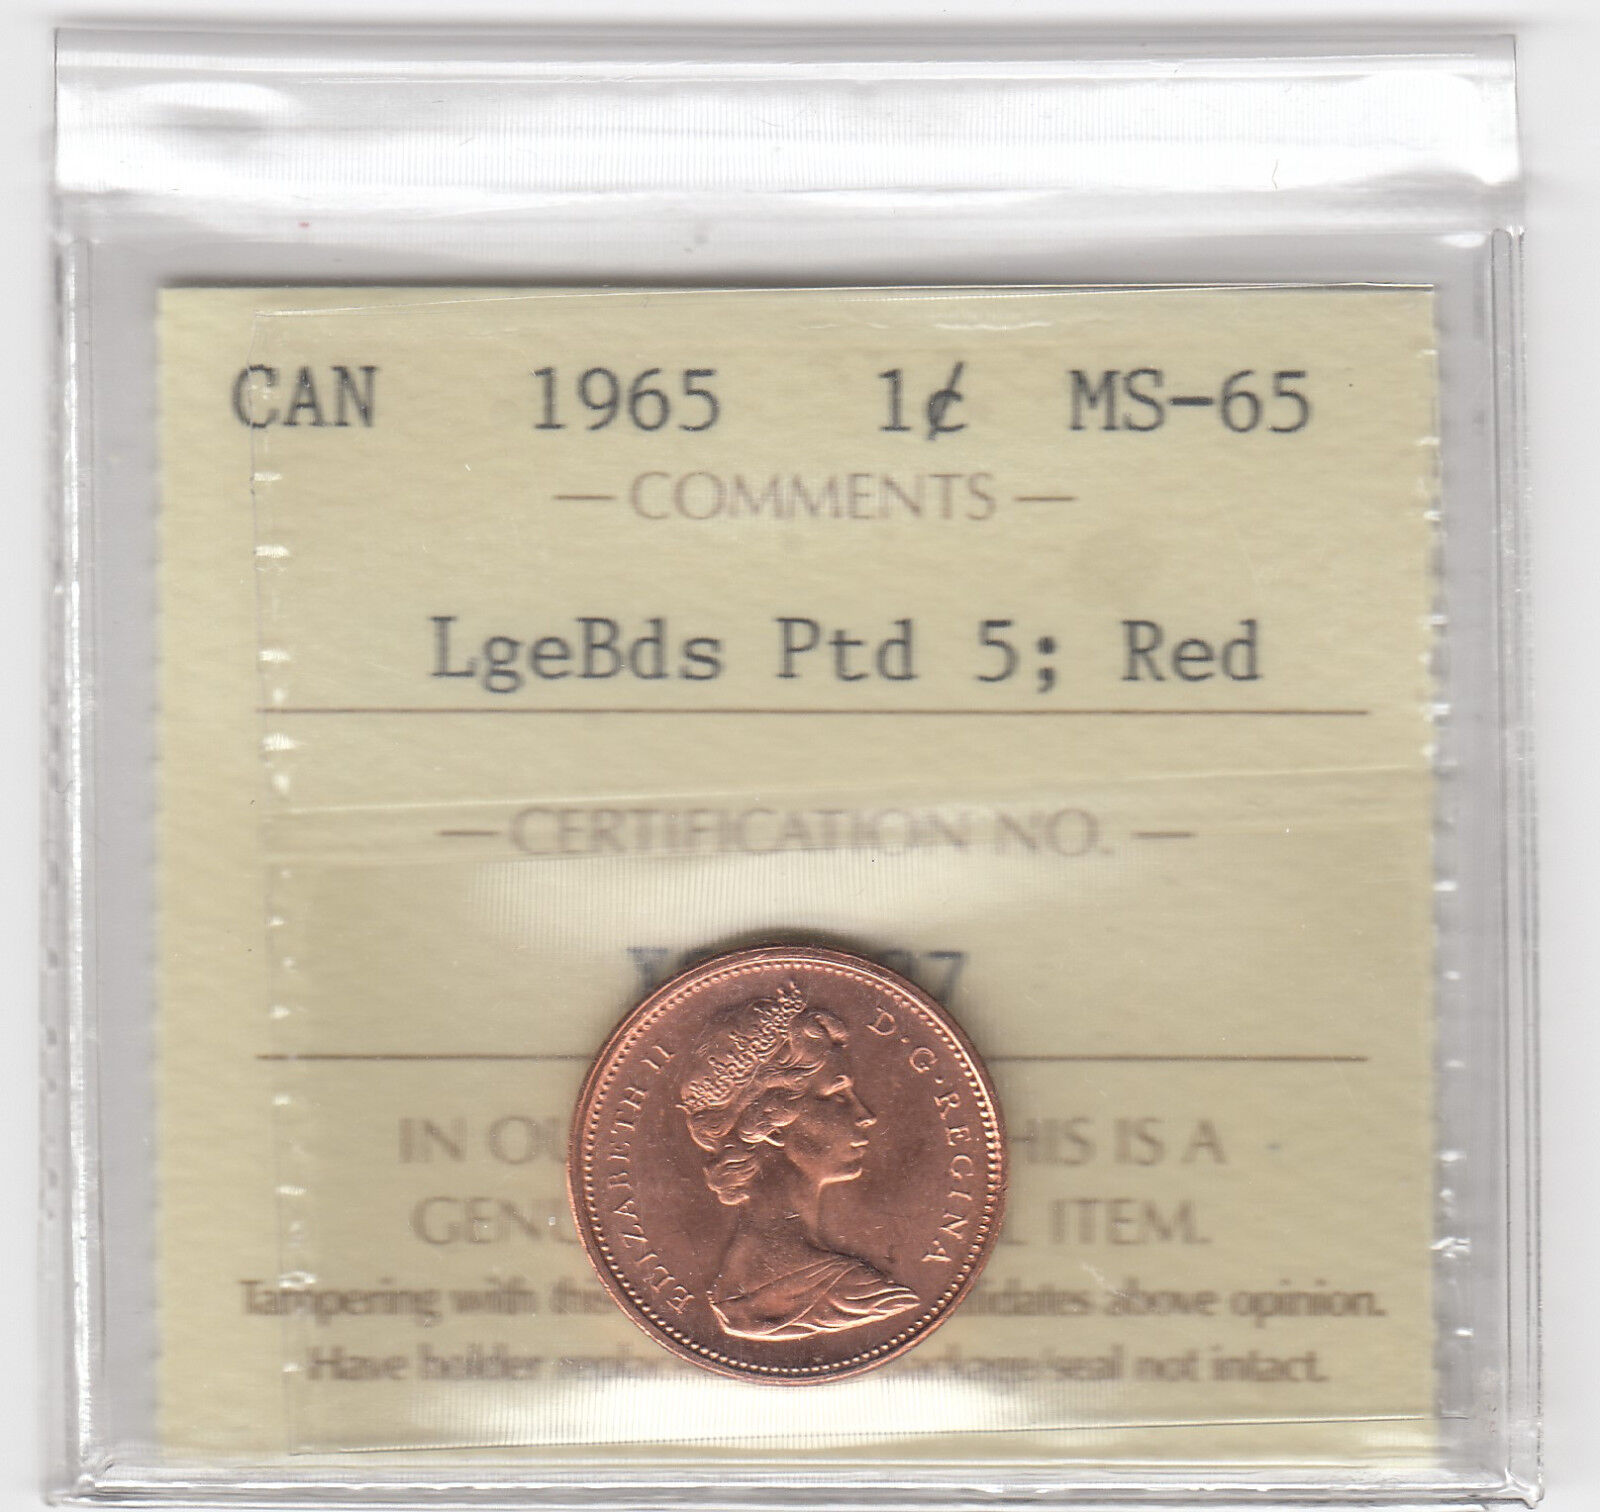 1965 Canada One Cent - ICCS MS-65 - Large Beads Pointed 5; Red -